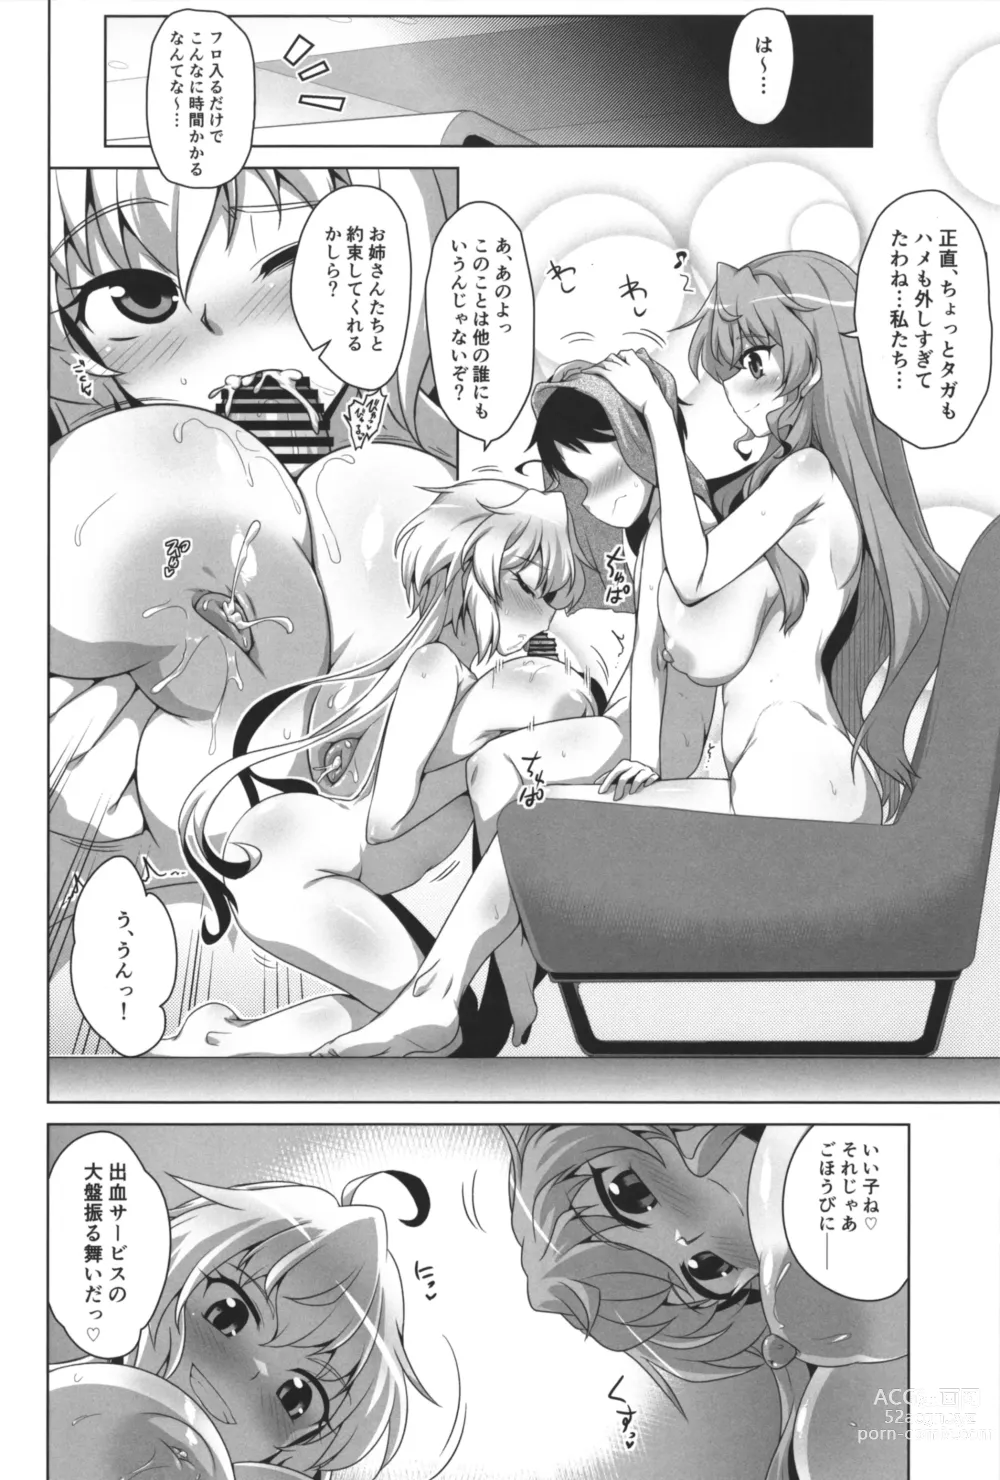 Page 21 of doujinshi WHITE†BULLET PARTY XRATED